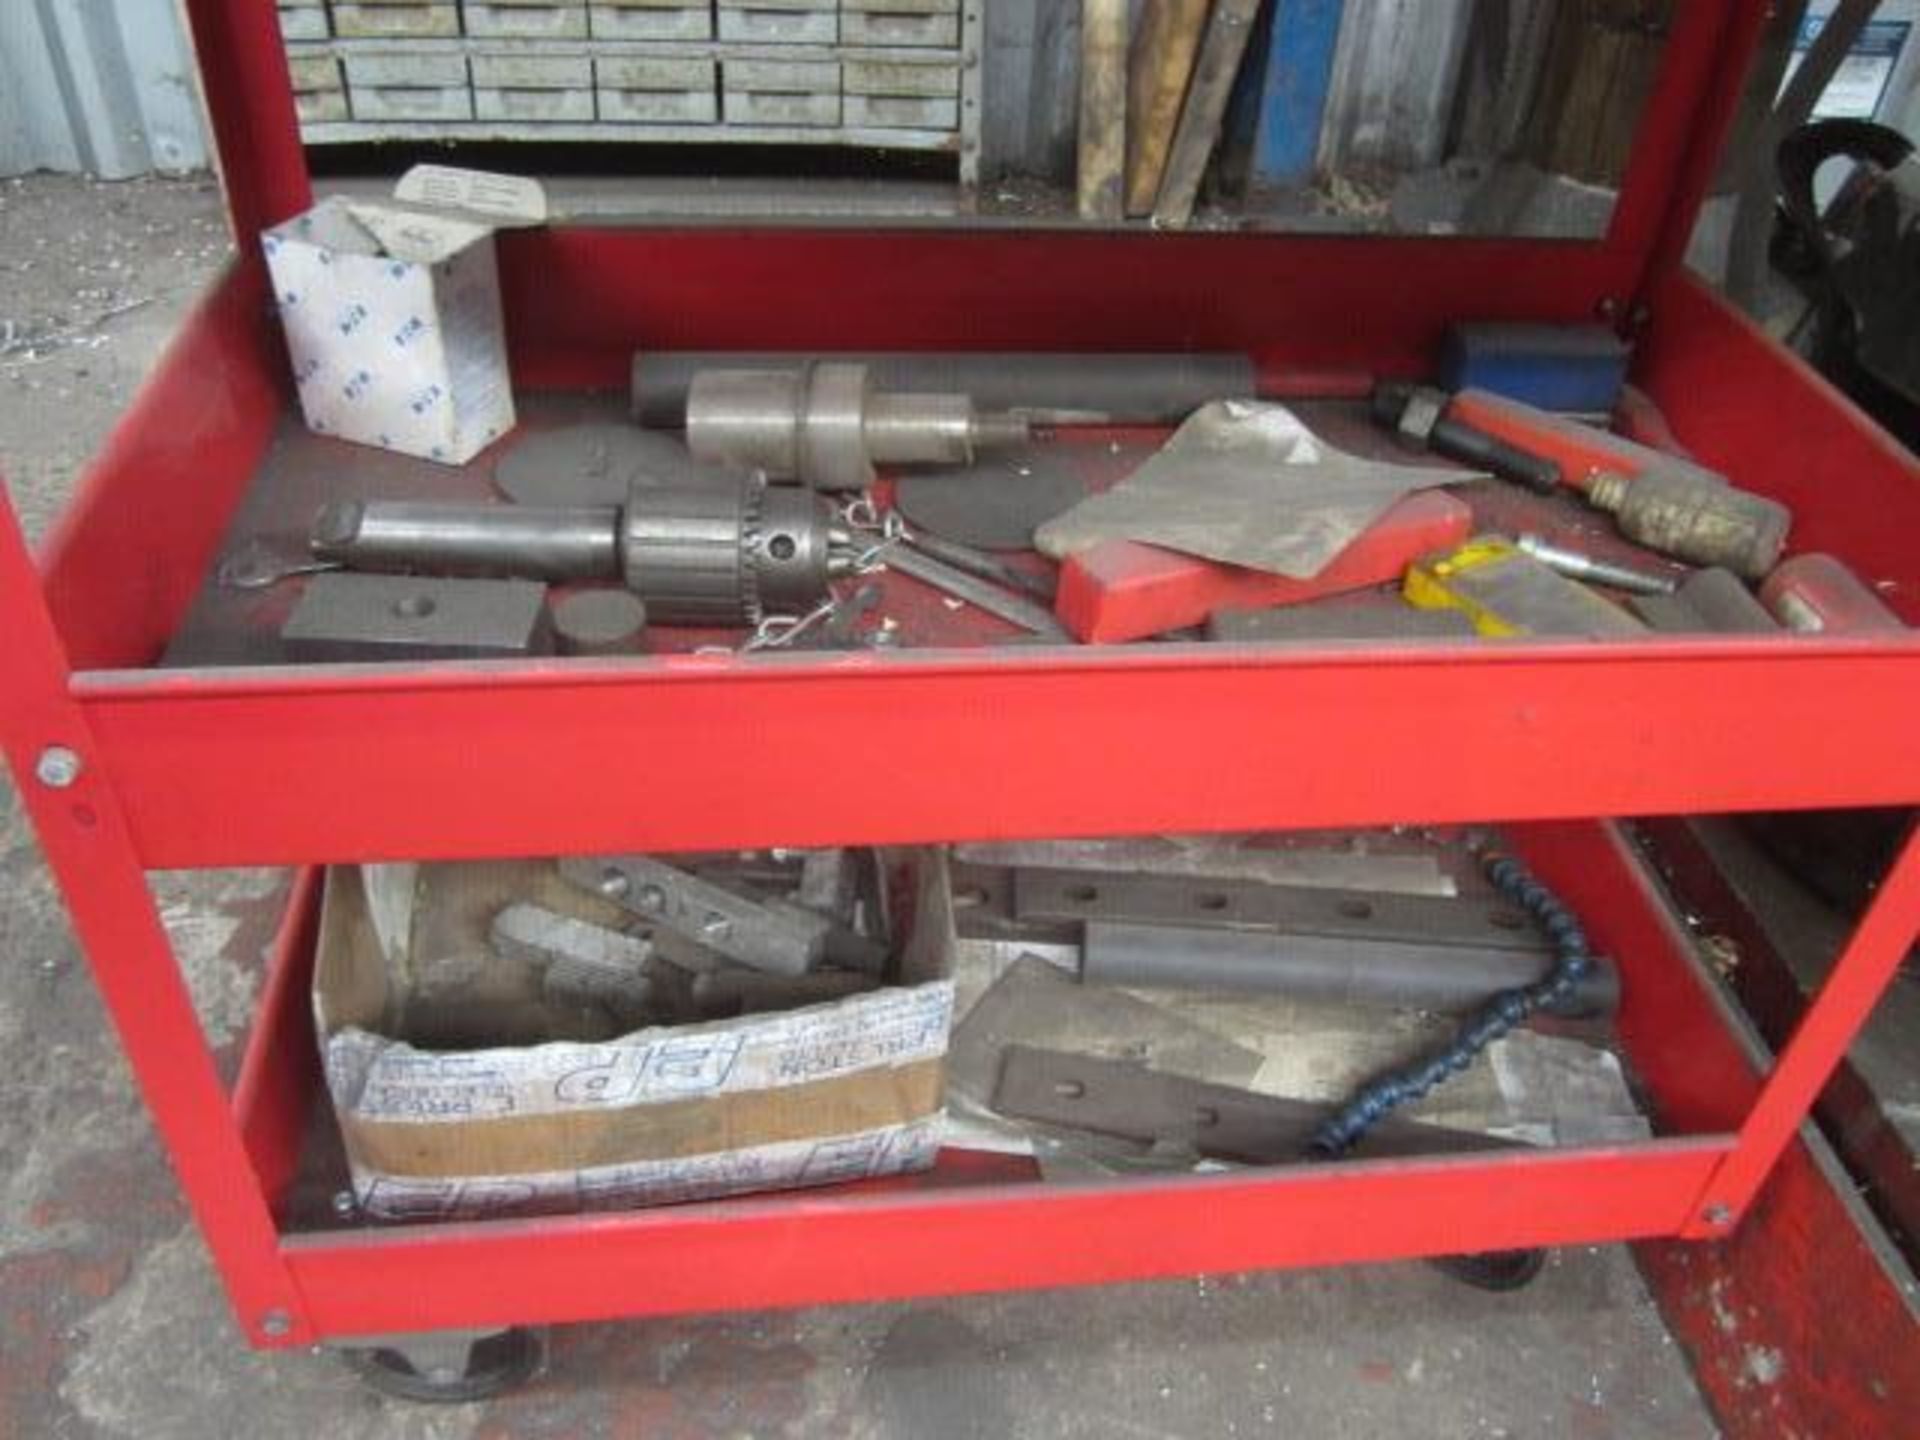 Smith Wilkinson Ltd manually operated X, Y, Z axis pillar drill, max rpm 2000, serial no. 82 8004, , - Image 10 of 11